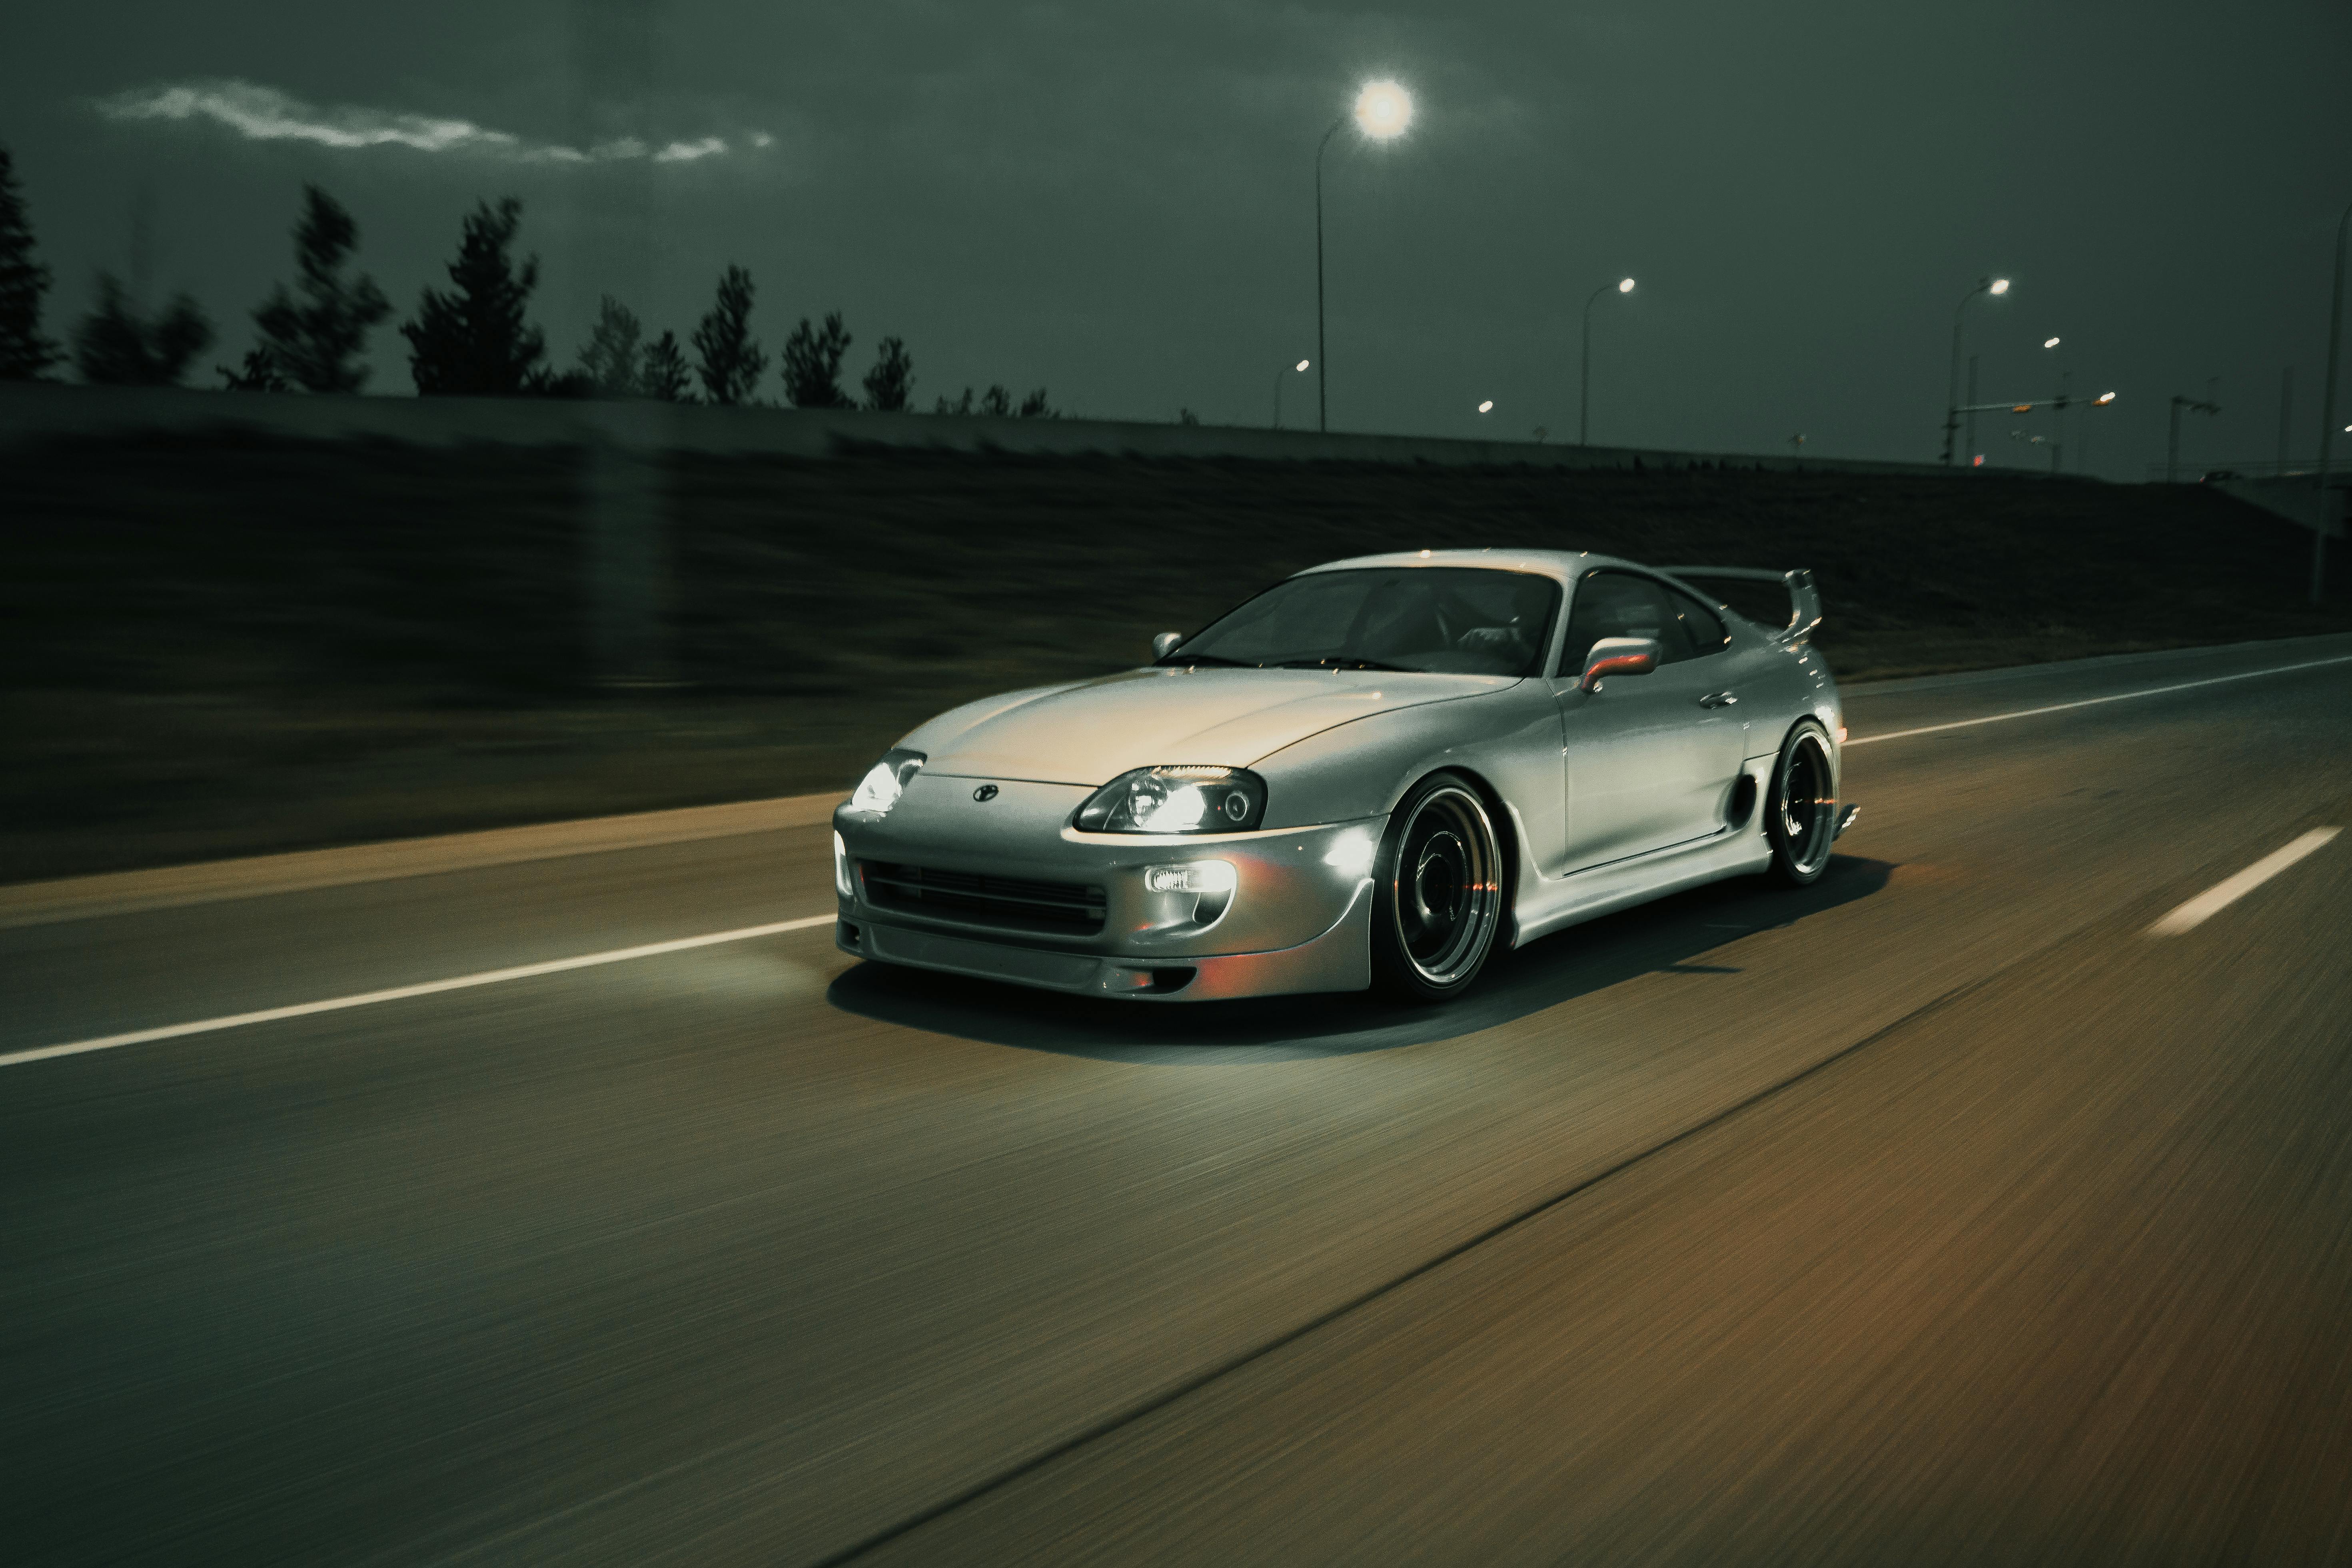 90+ Toyota Supra HD Wallpapers and Backgrounds